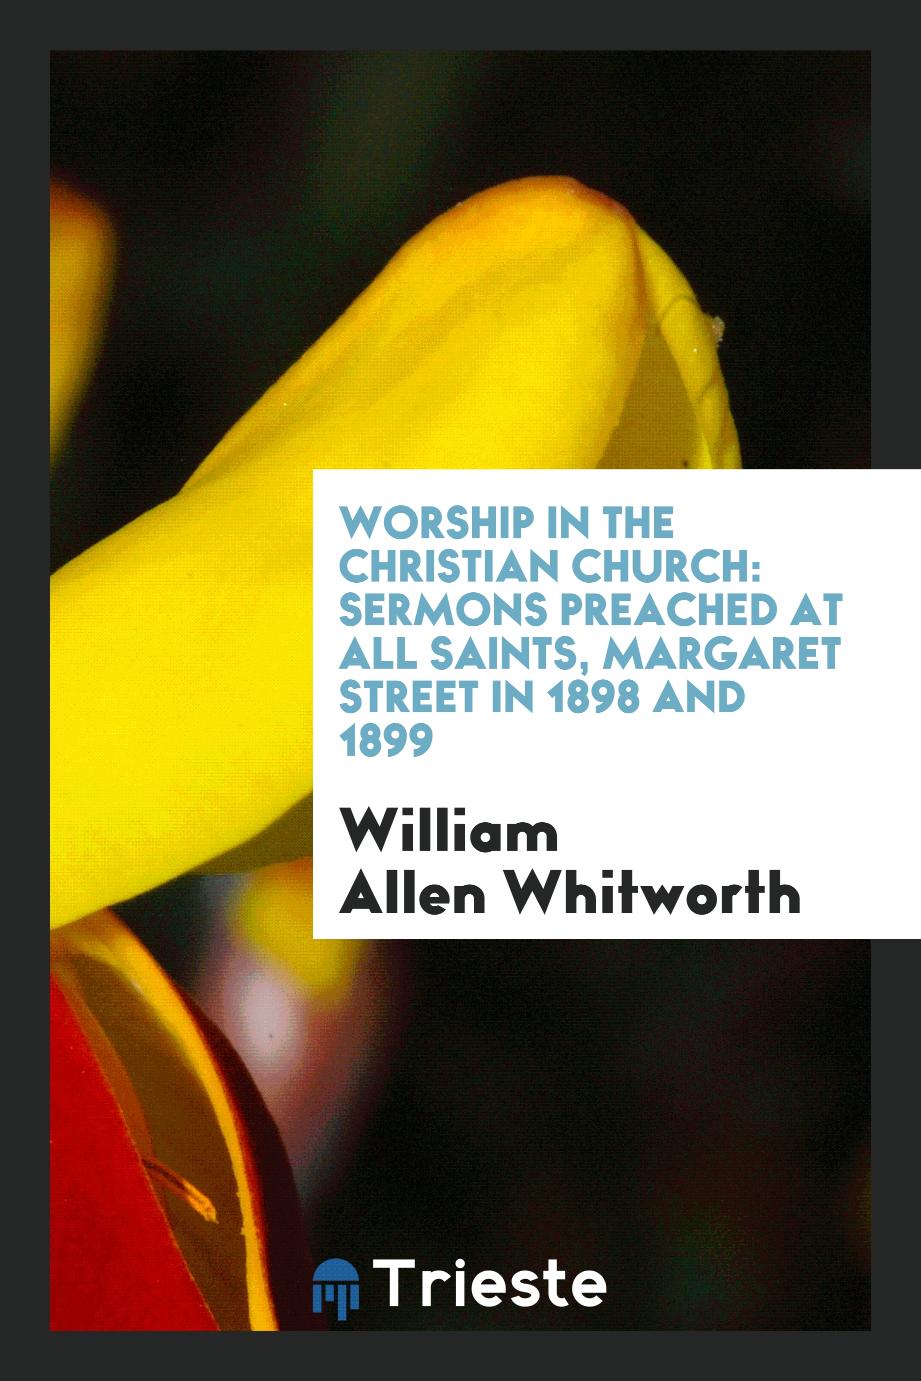 Worship in the Christian church: sermons preached at All Saints, Margaret Street in 1898 and 1899